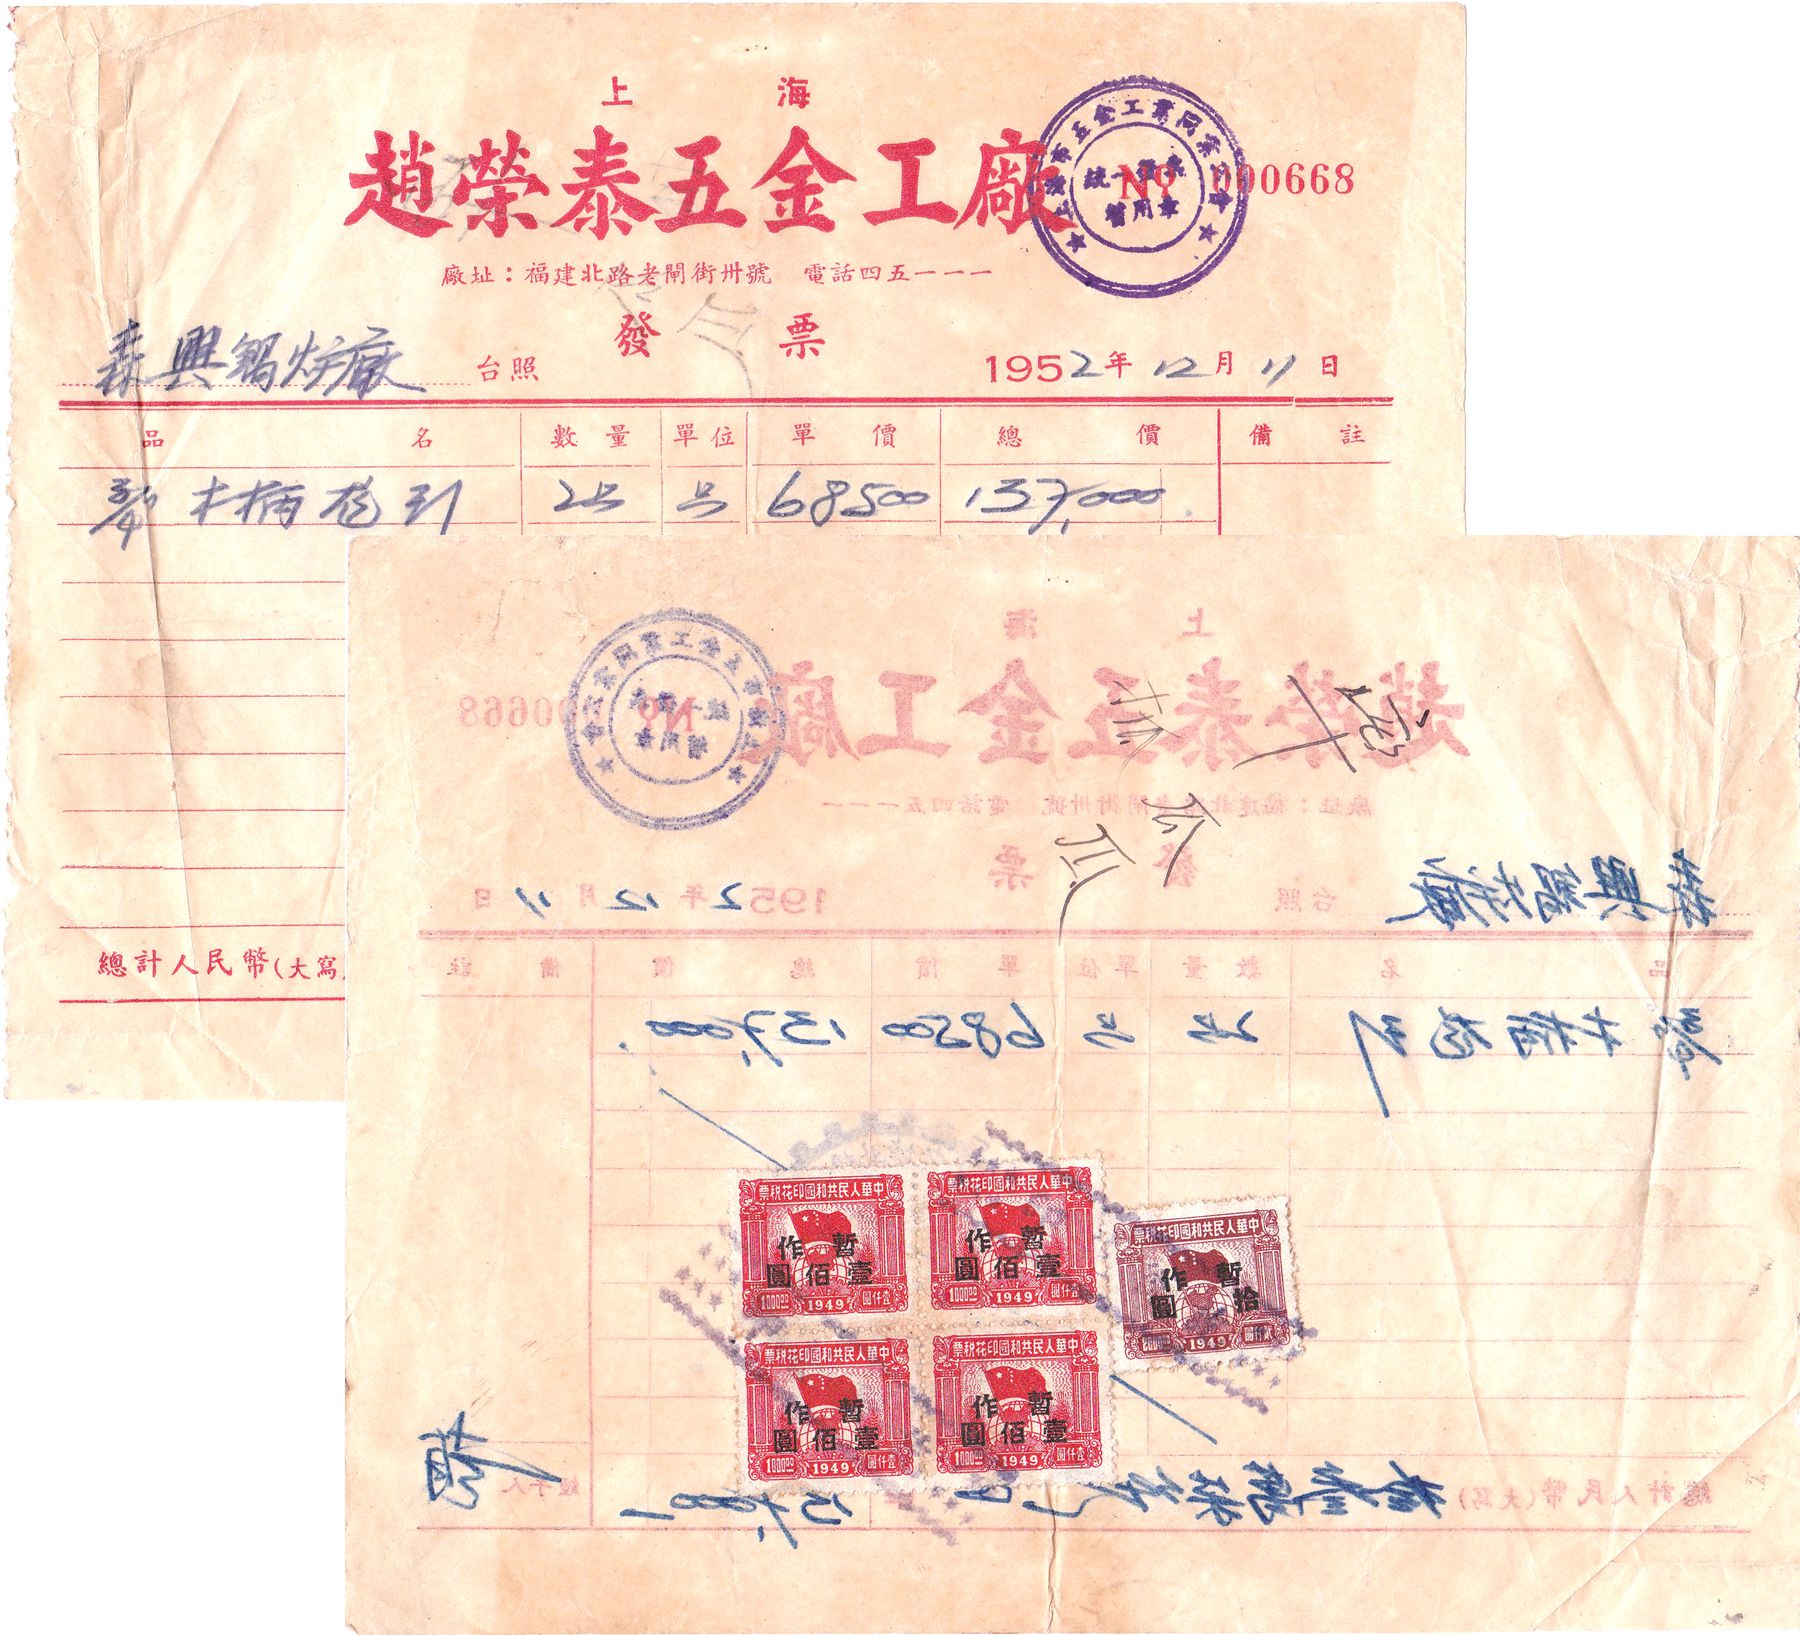 R2920, Shanghai Zhaorong Co,. Receipt of 1952, with 5 pcs Revenue Stamps